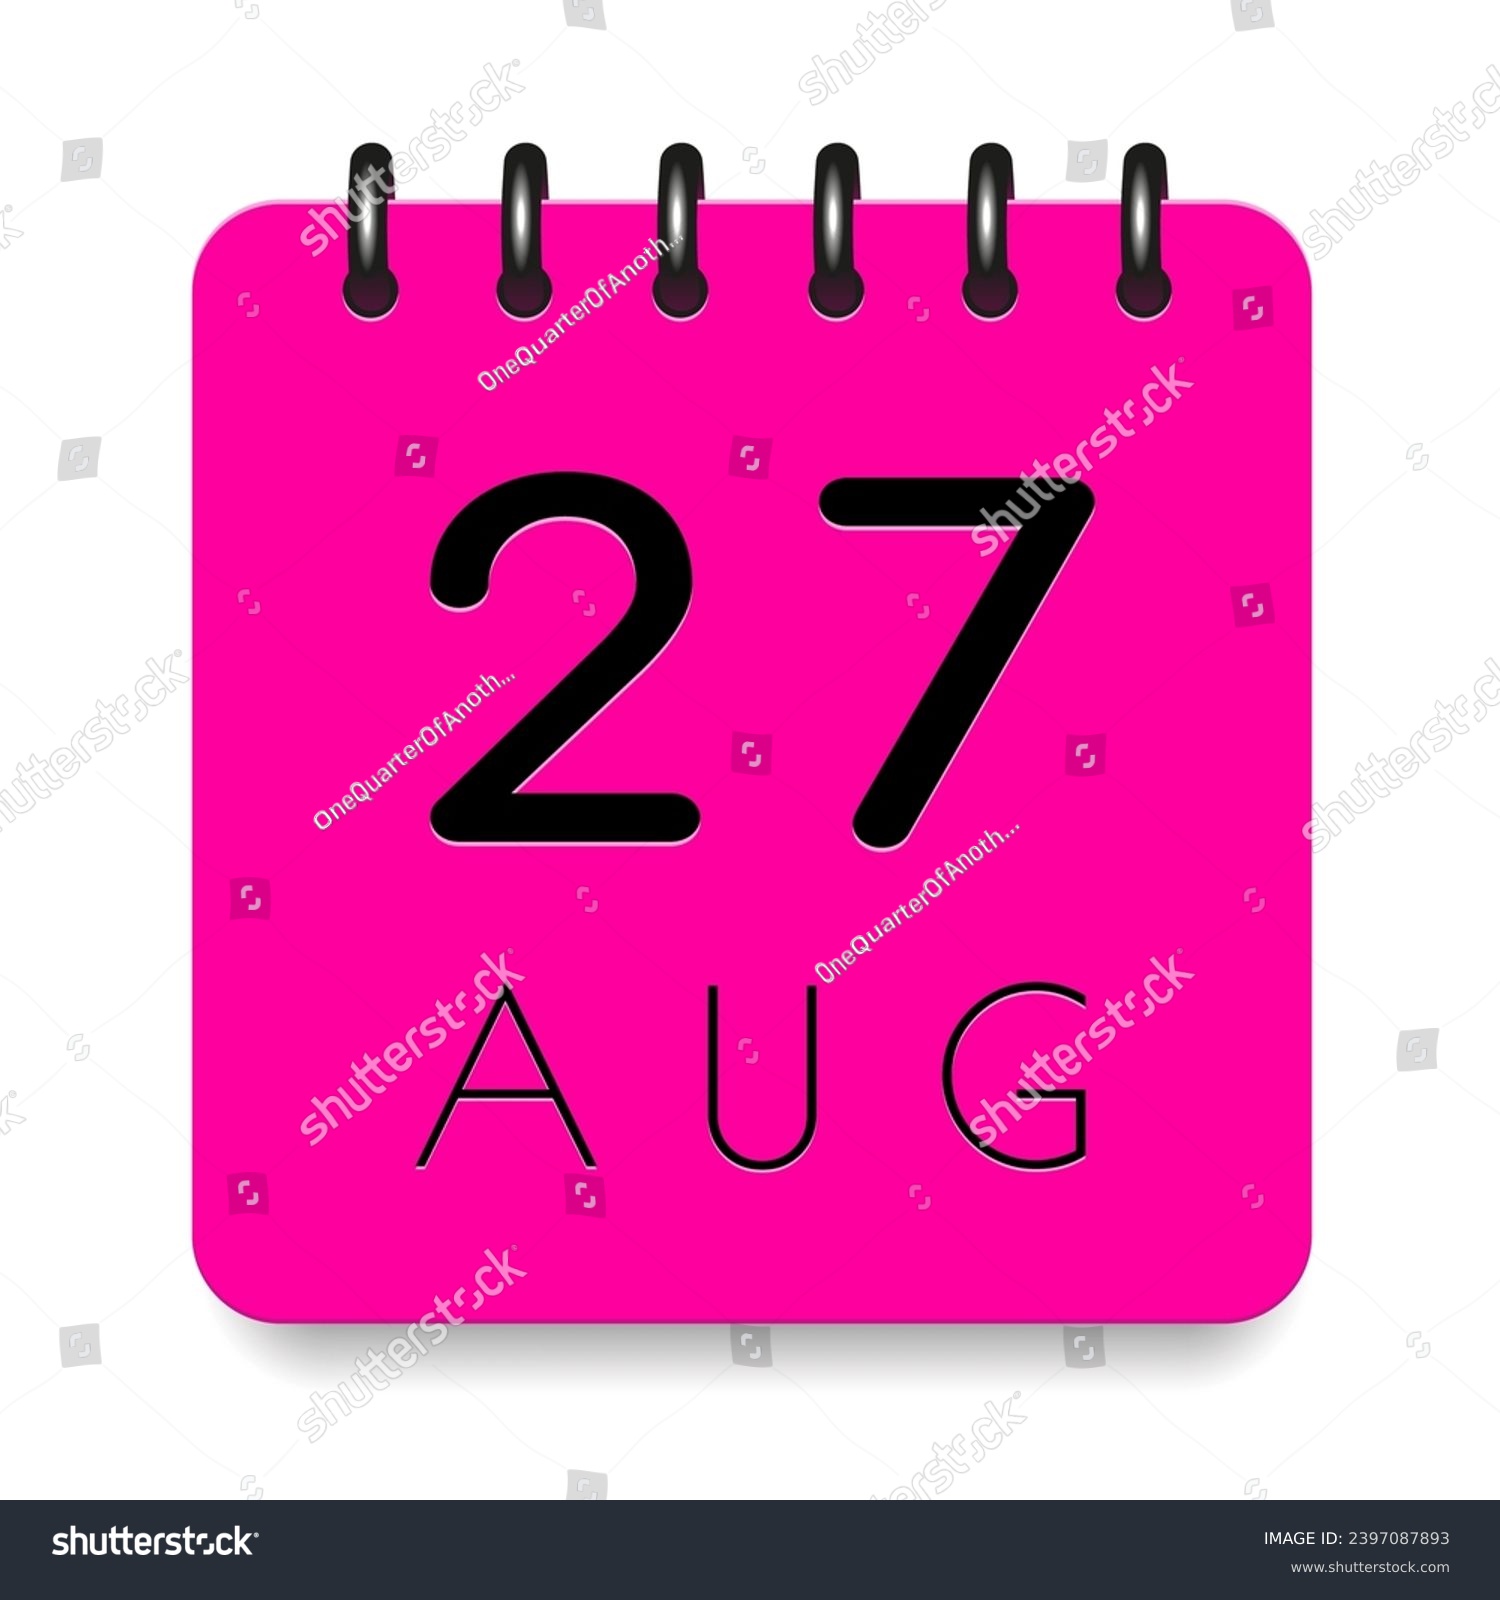 SVG of 27 day of the month. August. Pink calendar daily icon. Black letters. Date day week Sunday, Monday, Tuesday, Wednesday, Thursday, Friday, Saturday. Cut paper. White background. Vector illustration. svg